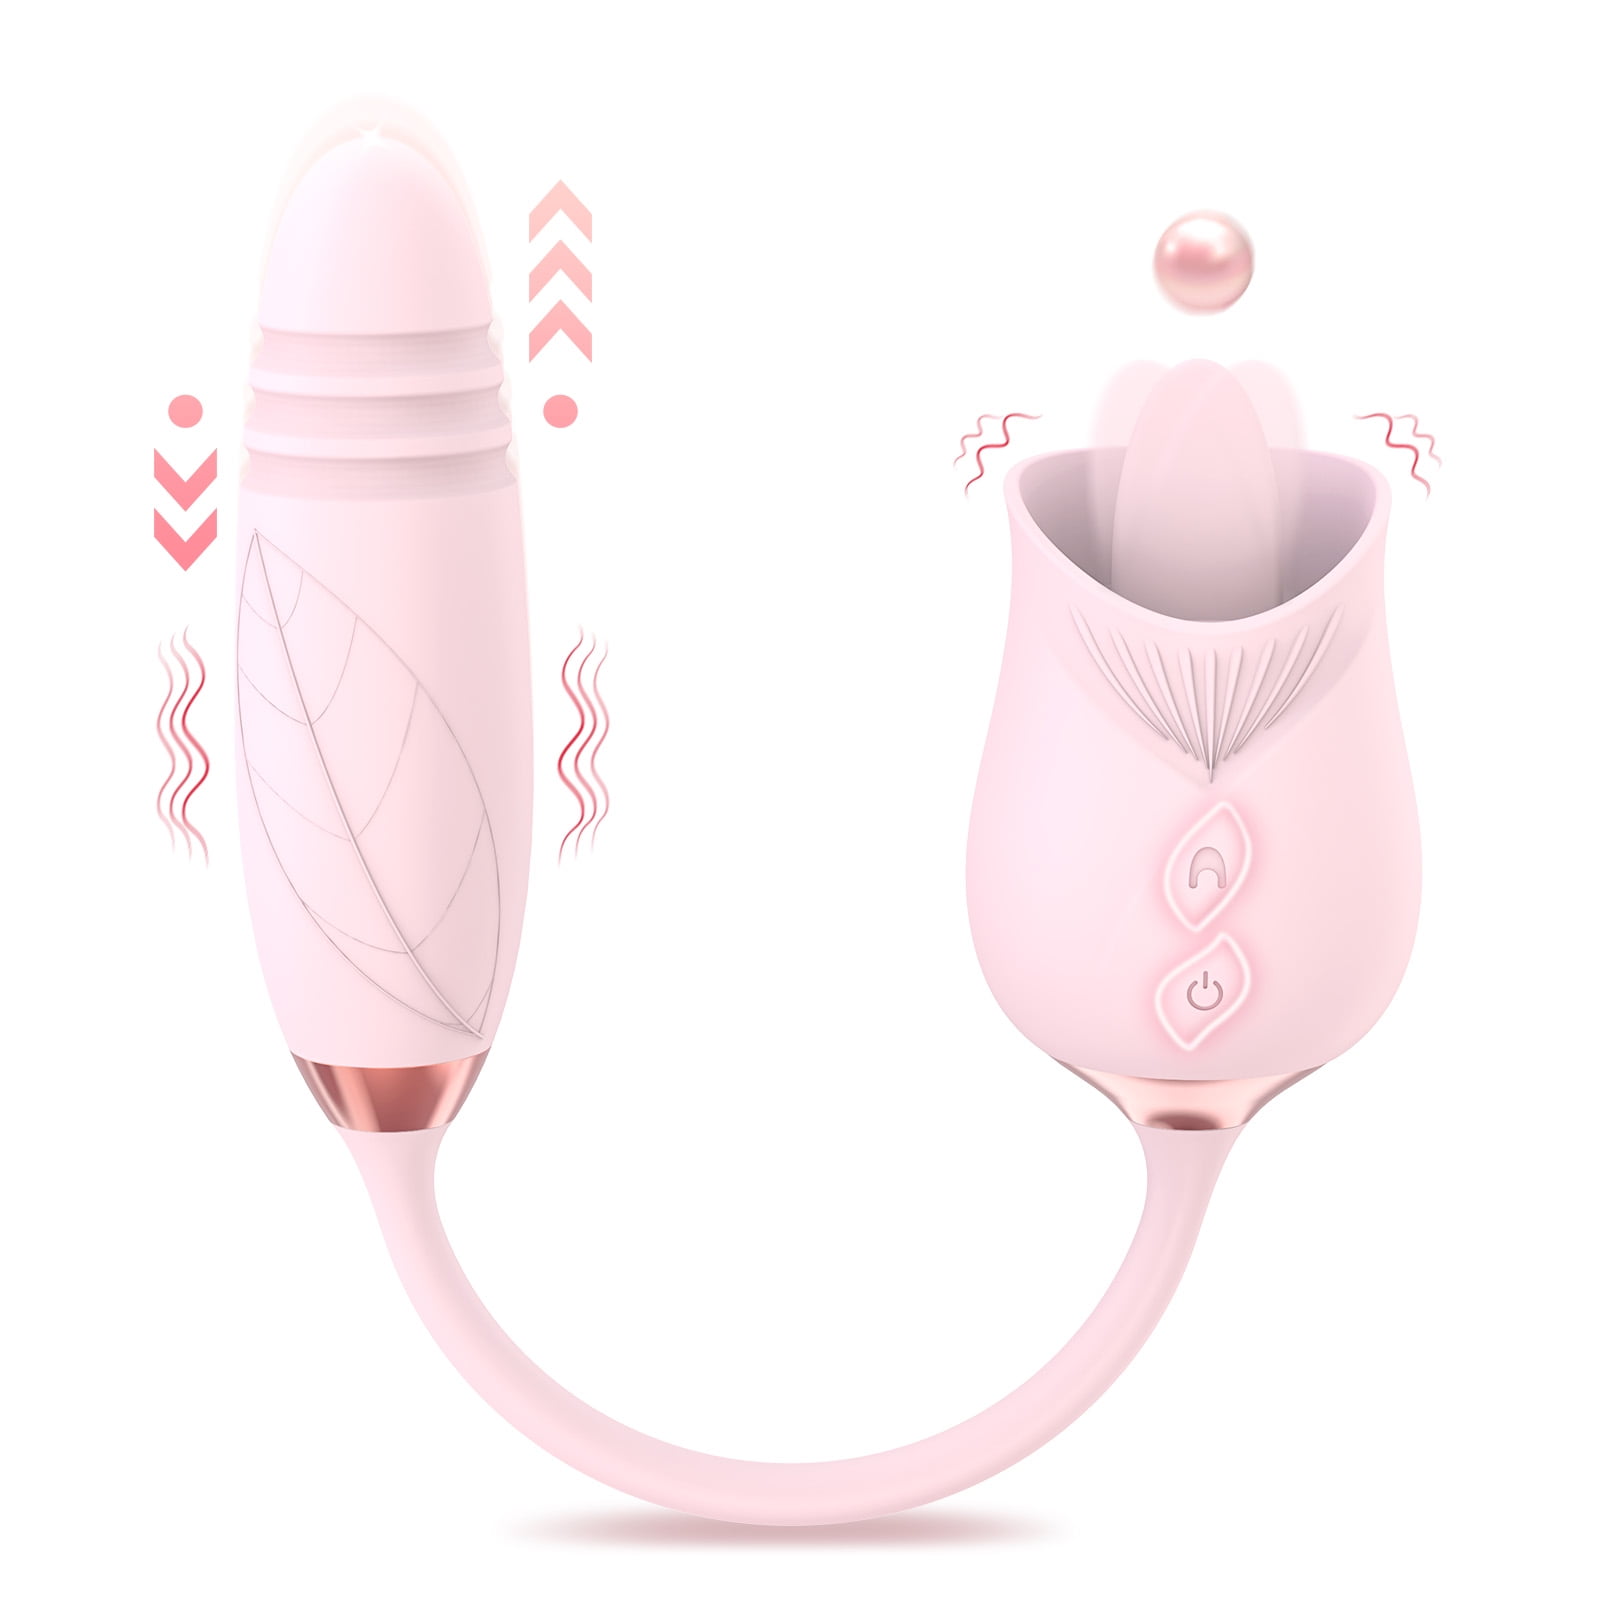 Rose Sex Toy Vibrator for Woman DARZU Adult Toys with 10 Modes, G-spot Dildo Nipple Massager Stimulator for Women - Pink